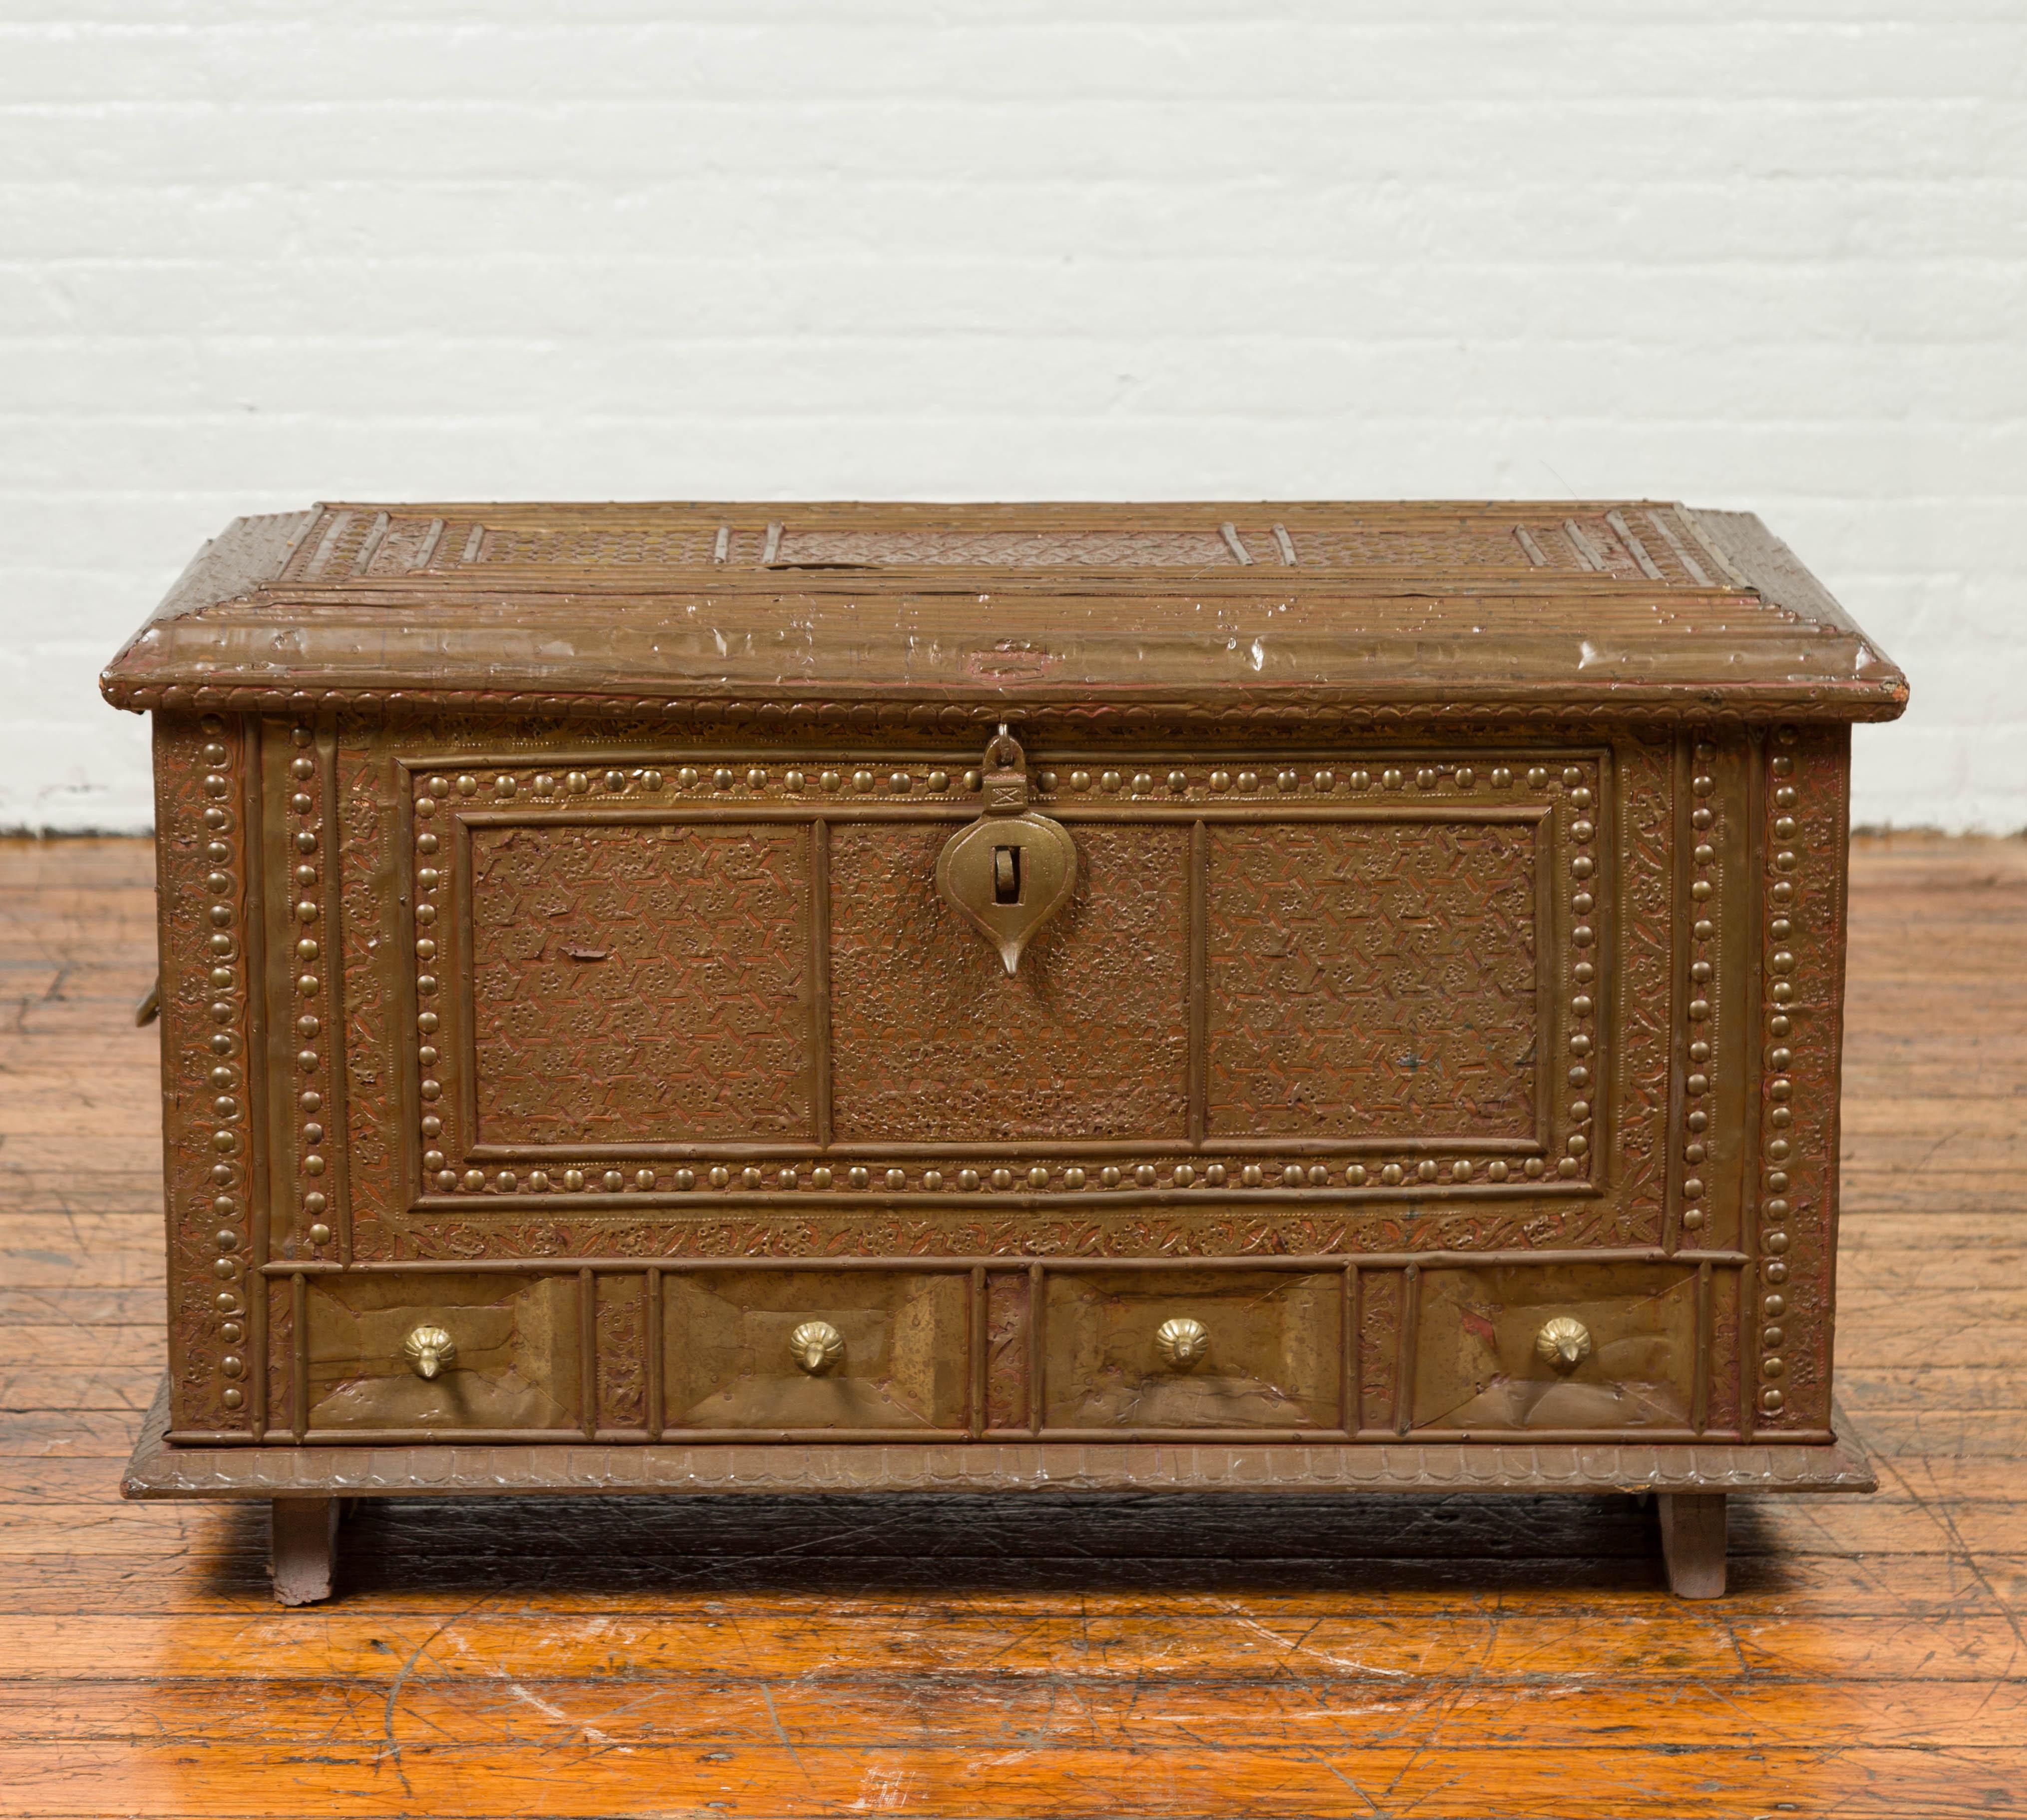 An antique Indian blanket chest with bronze sheathing, geometric patterns and studs. This Indian blanket chest features a rectangular top with raised effect, opening up thanks to a teardrop latch to reveal a large space, convenient to store blankets